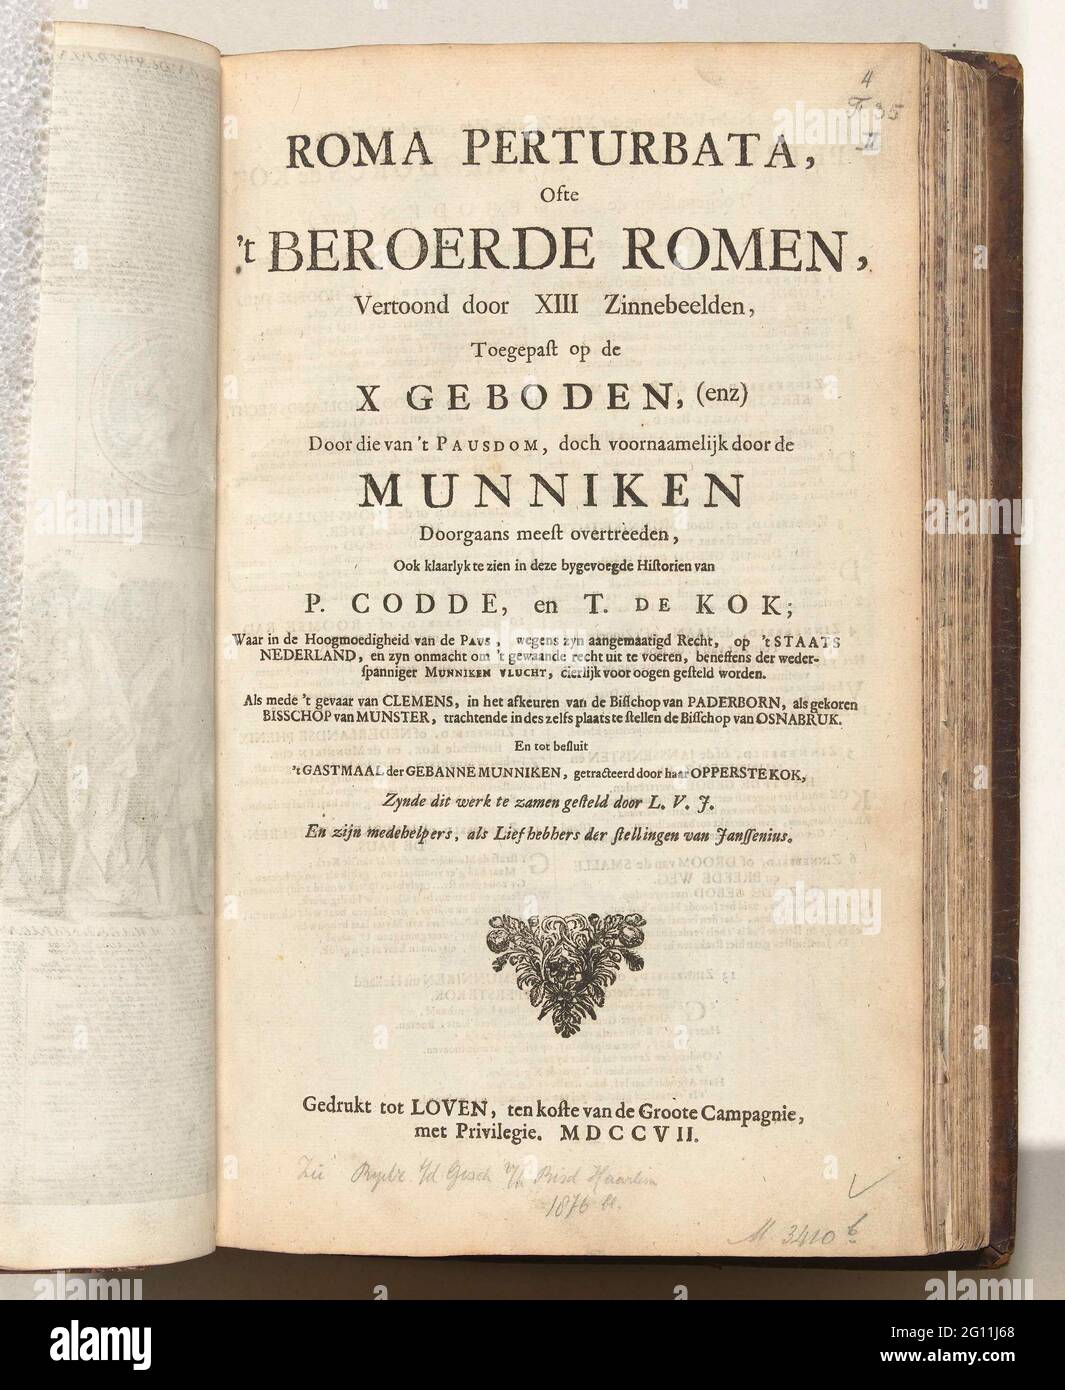 Title page for Roma Pertubata, 1706; Roma Perturbata, ORT 't stroke, shown by XIII symbols, applied to the X commandments, (etc) by that of Papersdom, but parasetically by the munniken usually to see most of P. in this by-enched Historians of P. Codde, and T. de Kok (...); Roma Pertubata / 't Lusthof from MoMus. Title page of the Roma Pertubata series of 1706, in the new multiploved edition of 1707. Series of 13 cartoons on the Jesuits in their disputes in 1705 with the Jansenists in the Republic. Part of the printing work under the collective title 't Lust Court of Momus with the bundled seri Stock Photo